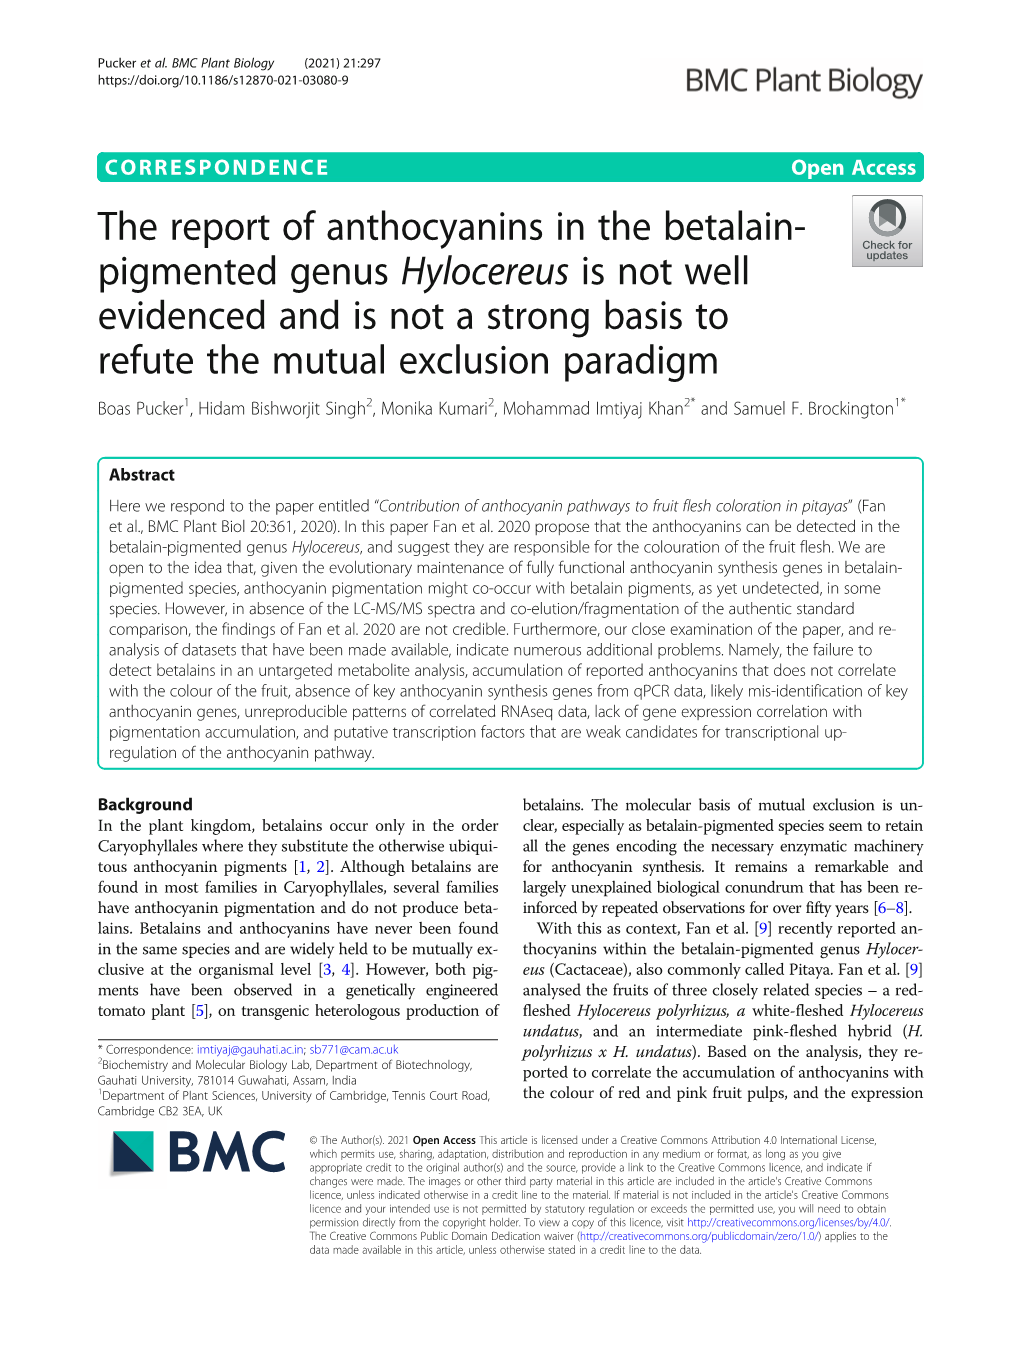 The Report of Anthocyanins in the Betalain